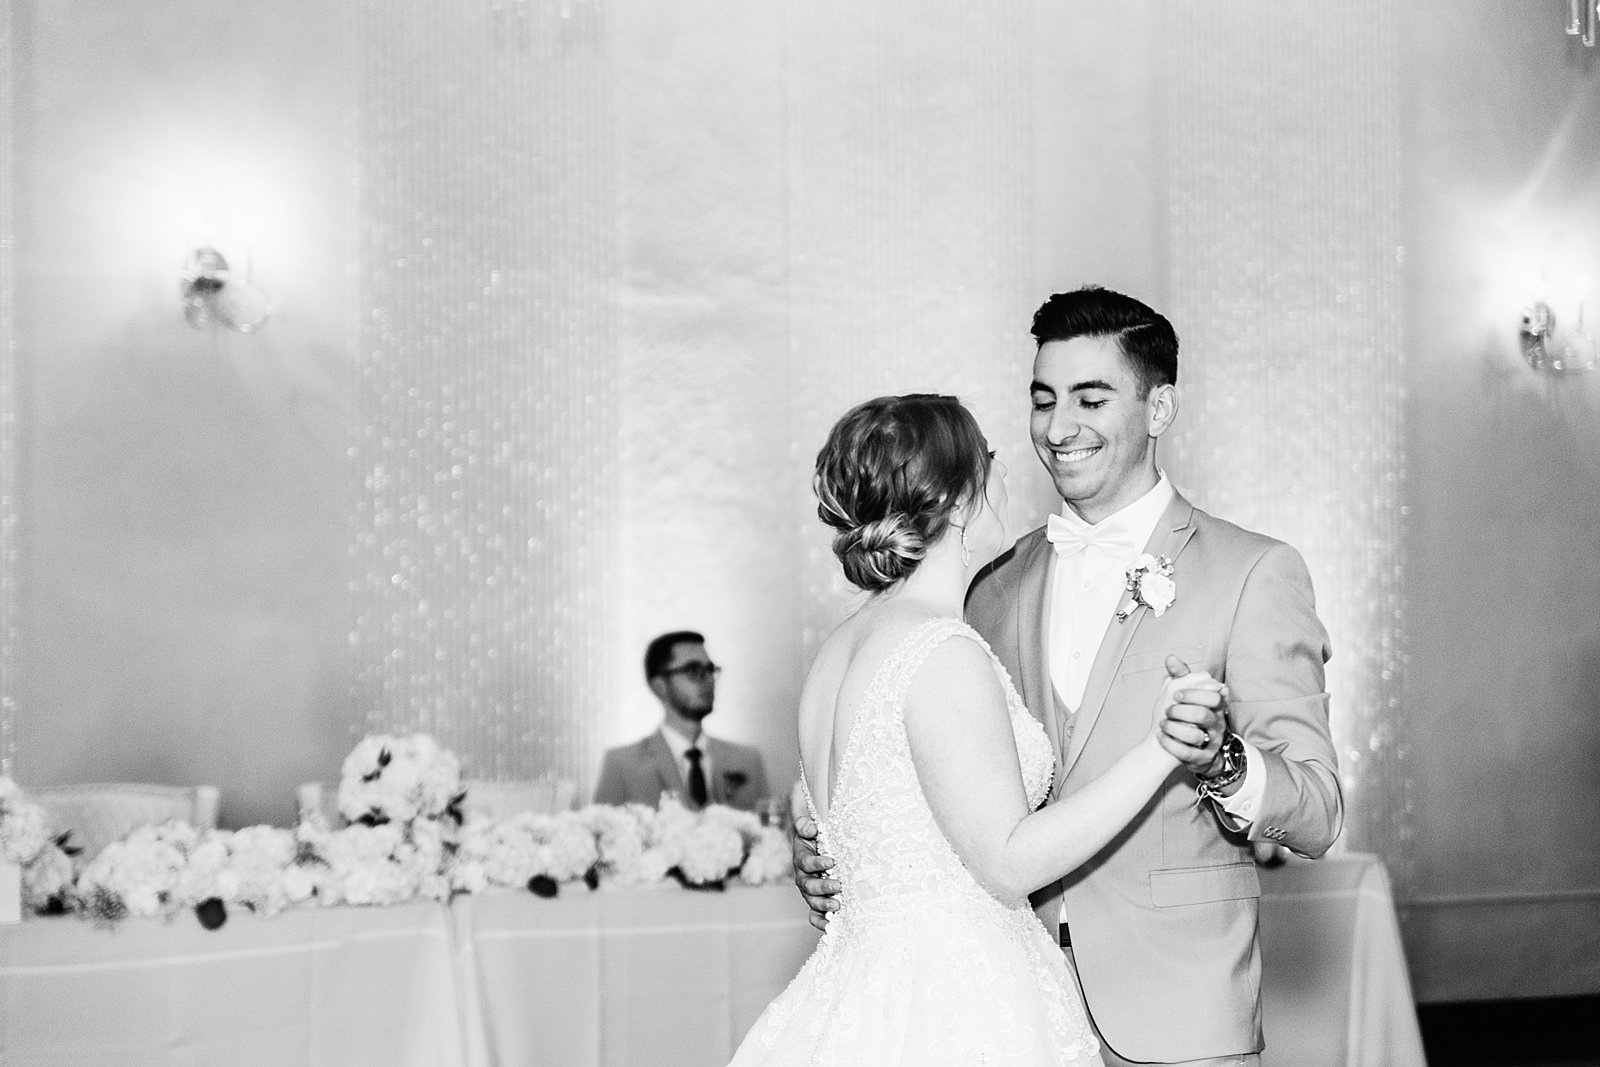 Bride and Groom sharing first dance at their SoHo63 wedding reception by Arizona wedding photographer PMA Photography.